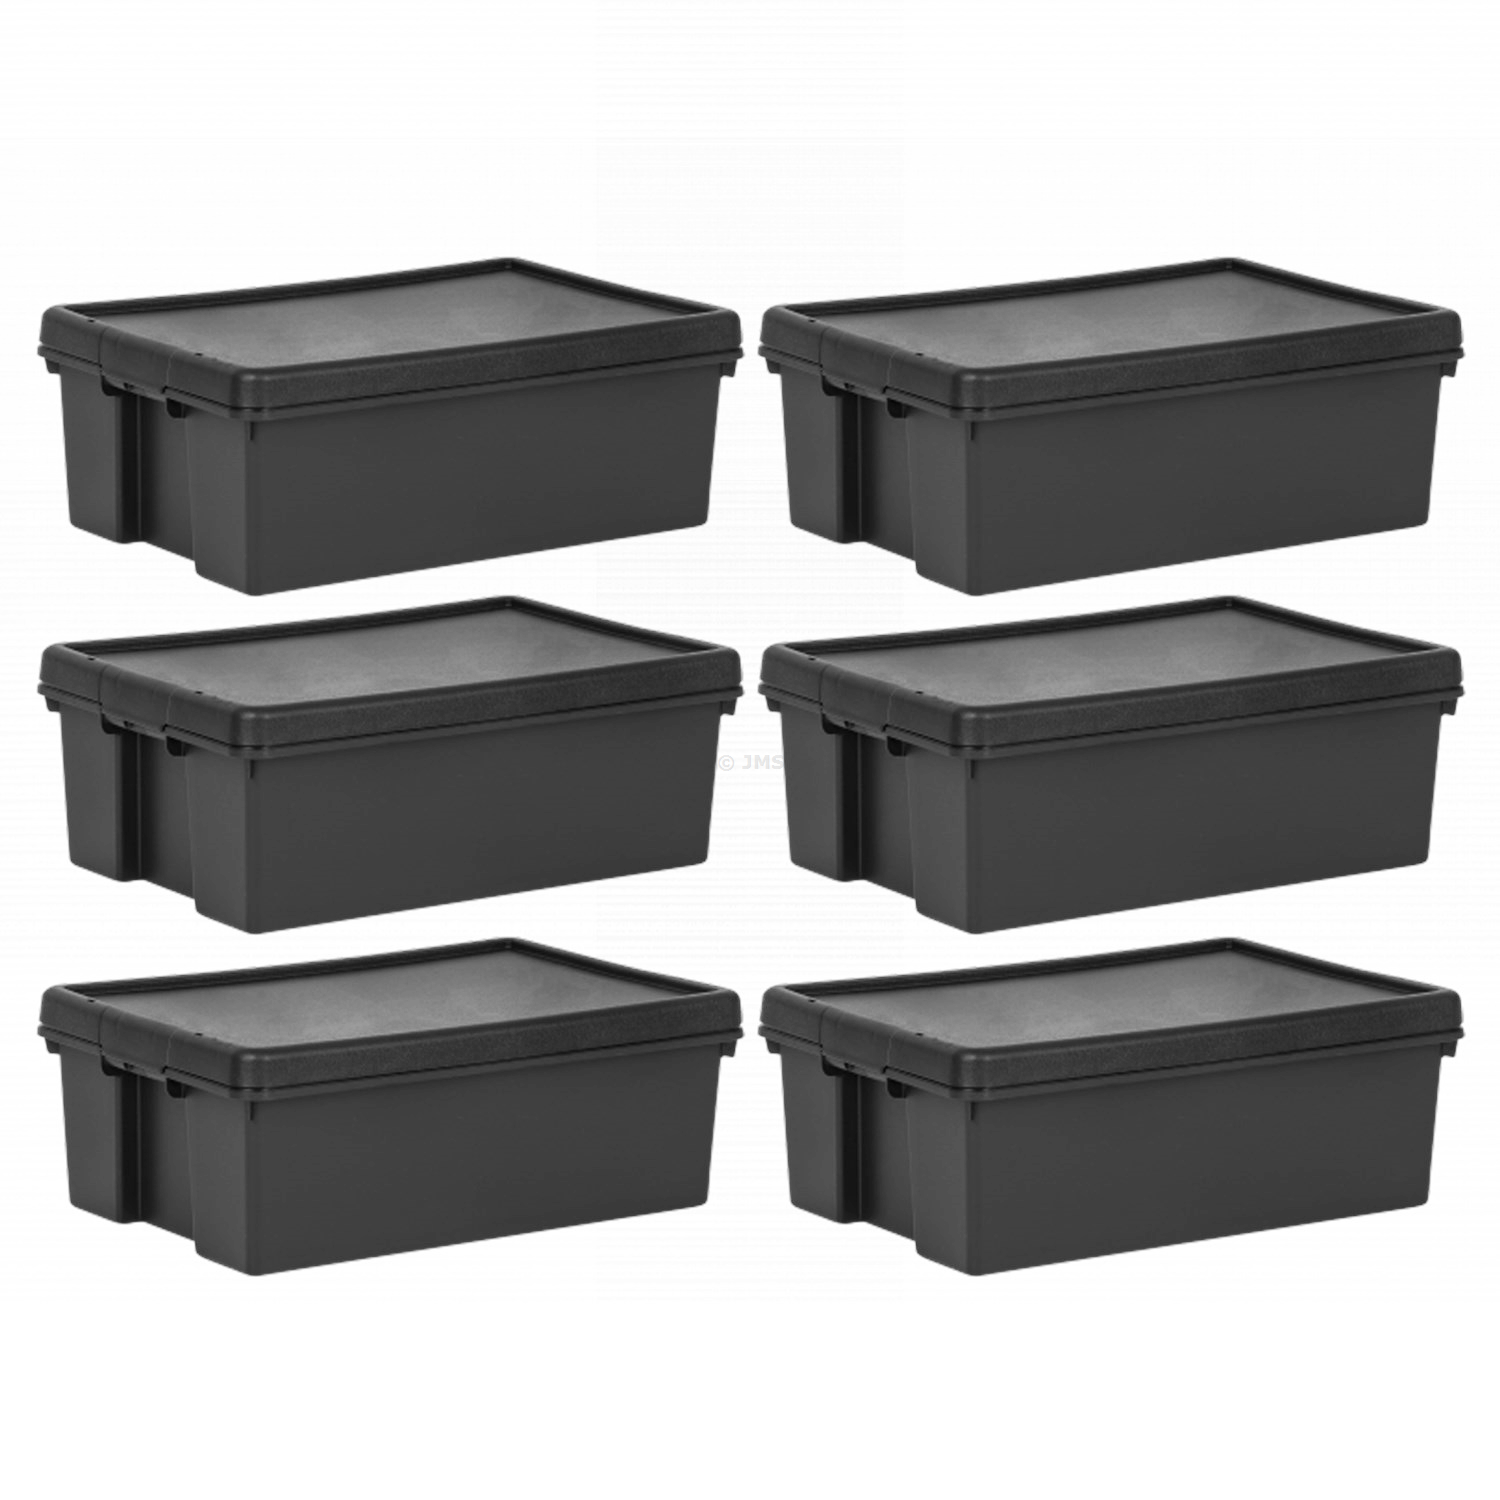 6 x Black Heavy Duty 36L Storage Box with Lid Recycled Plastic Stackable Boxes Nestable Containers Home Office Garage